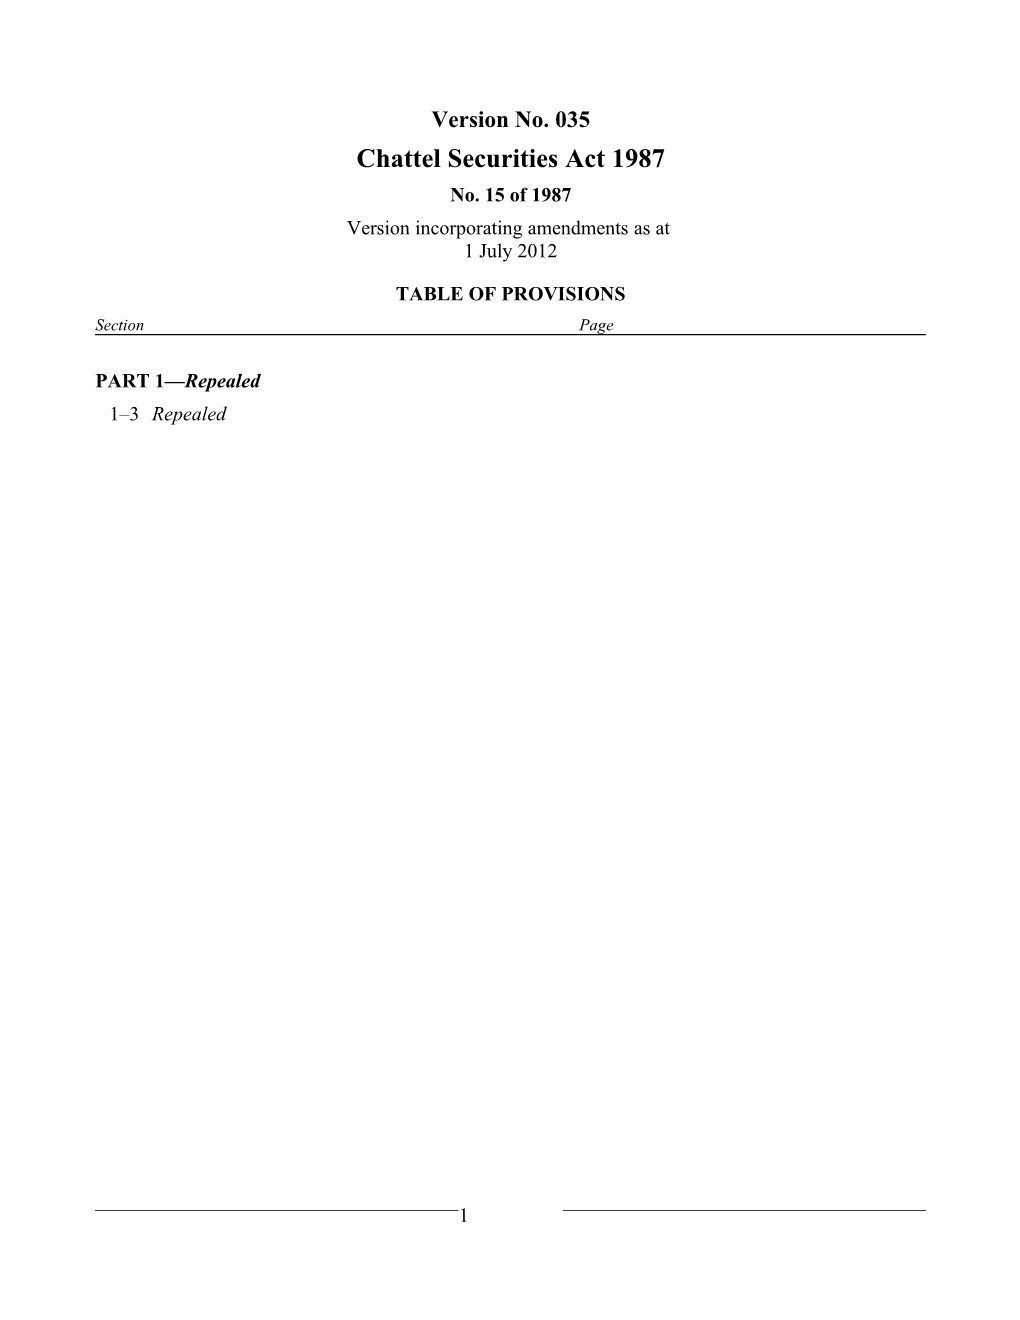 Chattel Securities Act 1987